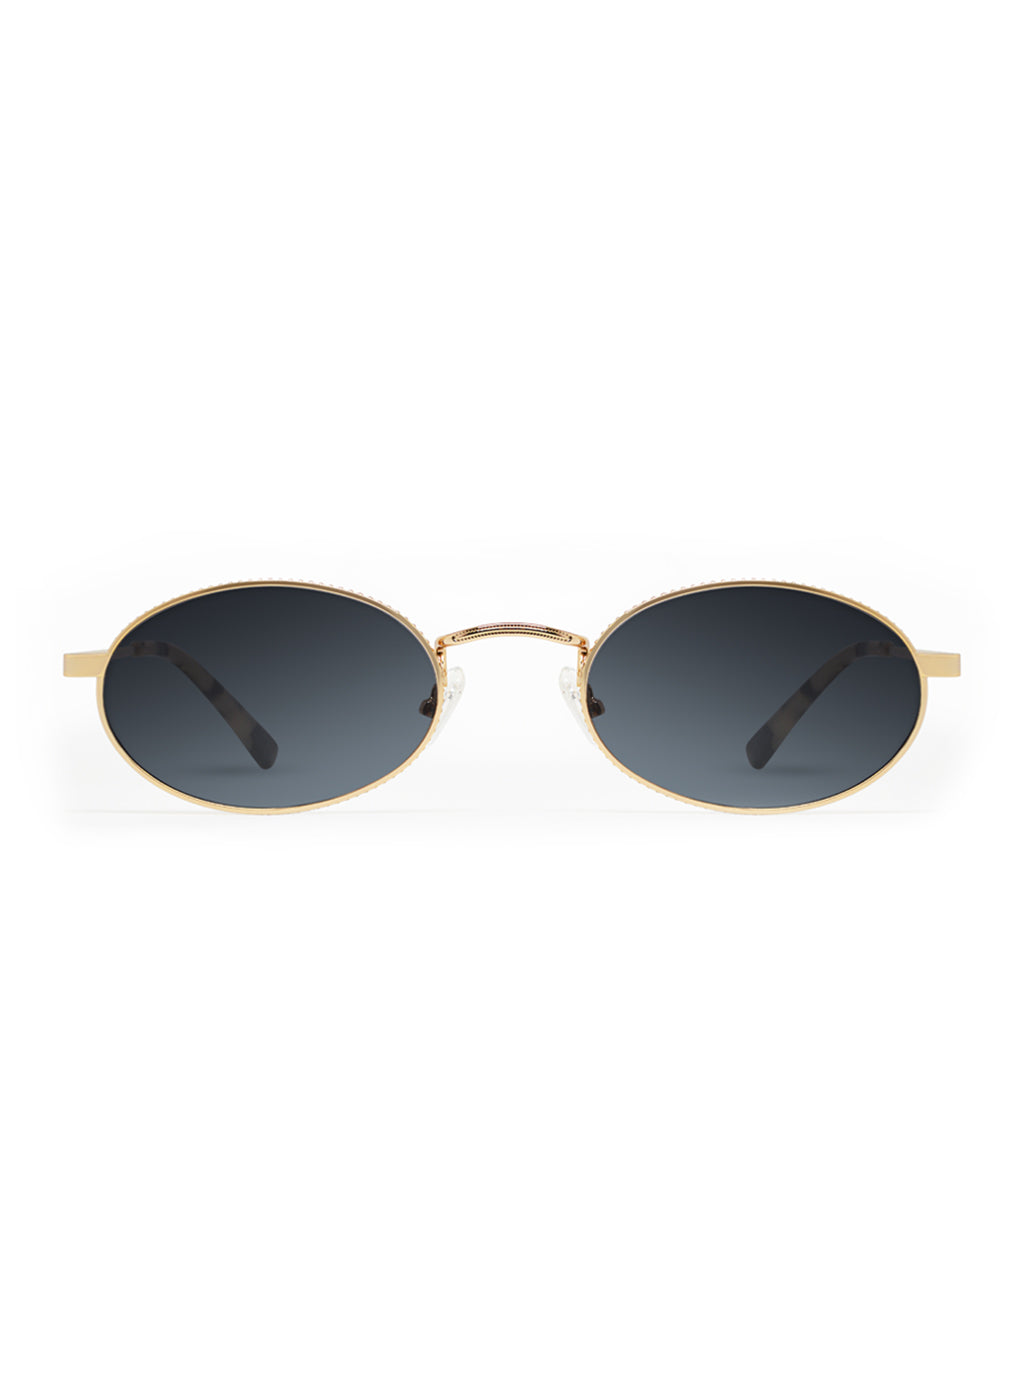 RO Gold with Silver Mirrored Lenses